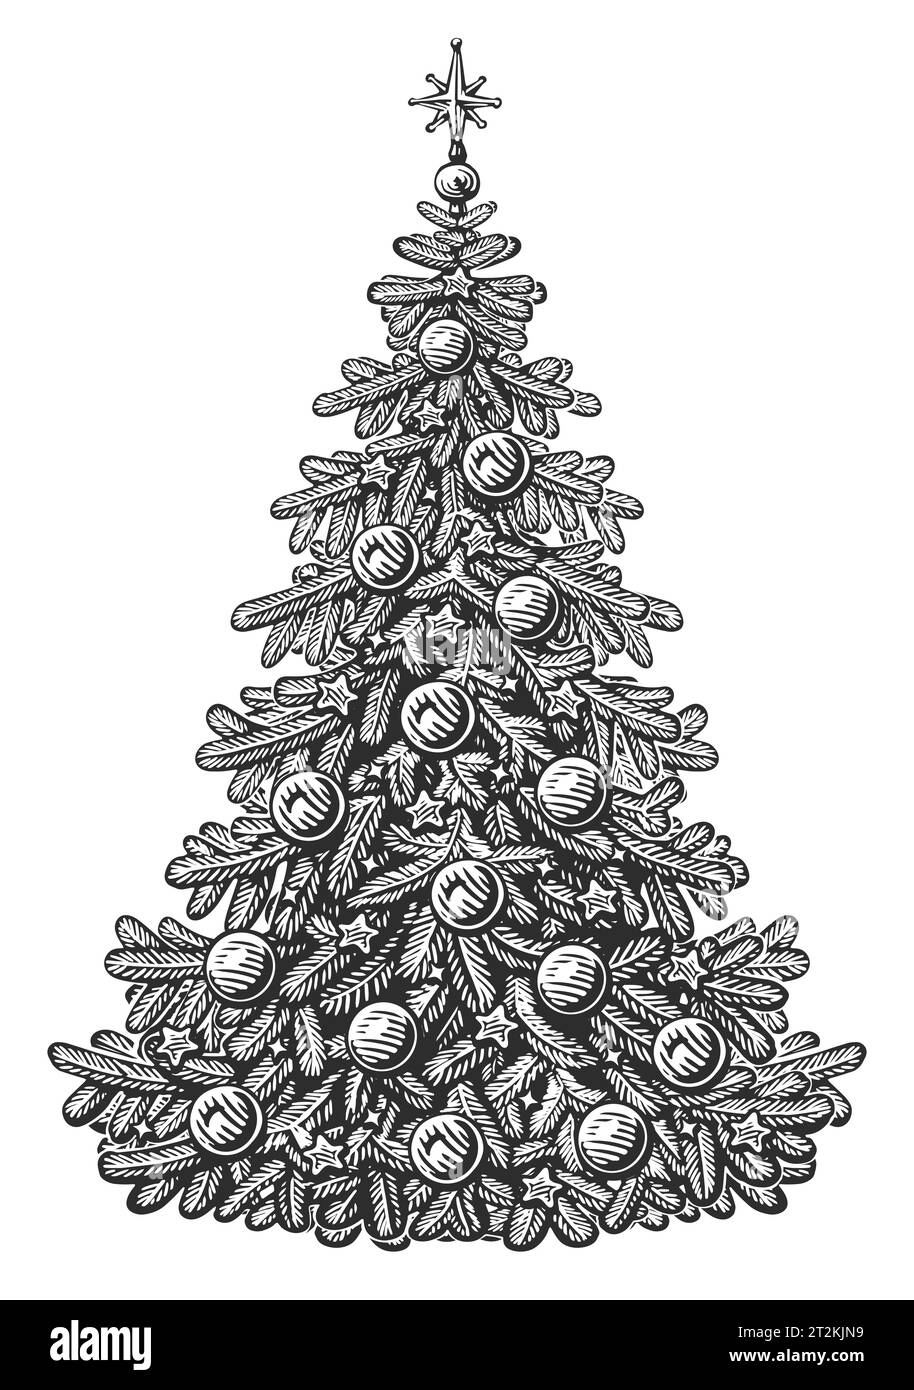 Hand drawn fir tree decorated with lights and balls. Merry Christmas and Happy New Year. Illustration sketch Stock Photo